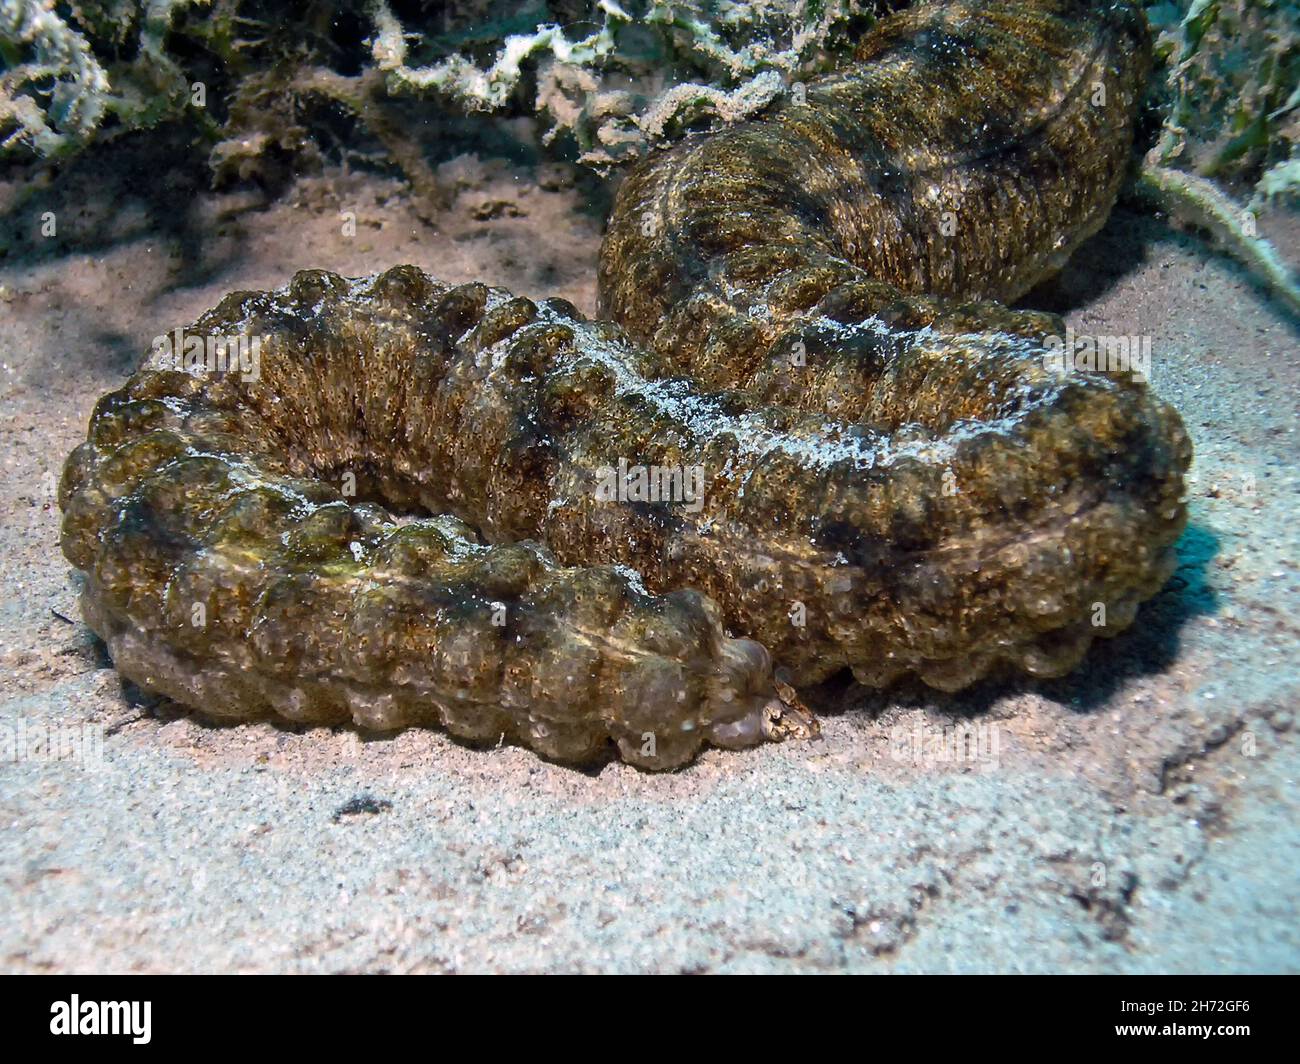 A Sea Cucumber (Synaptula reciprocans) in the Red Sea, Egypt Stock Photo